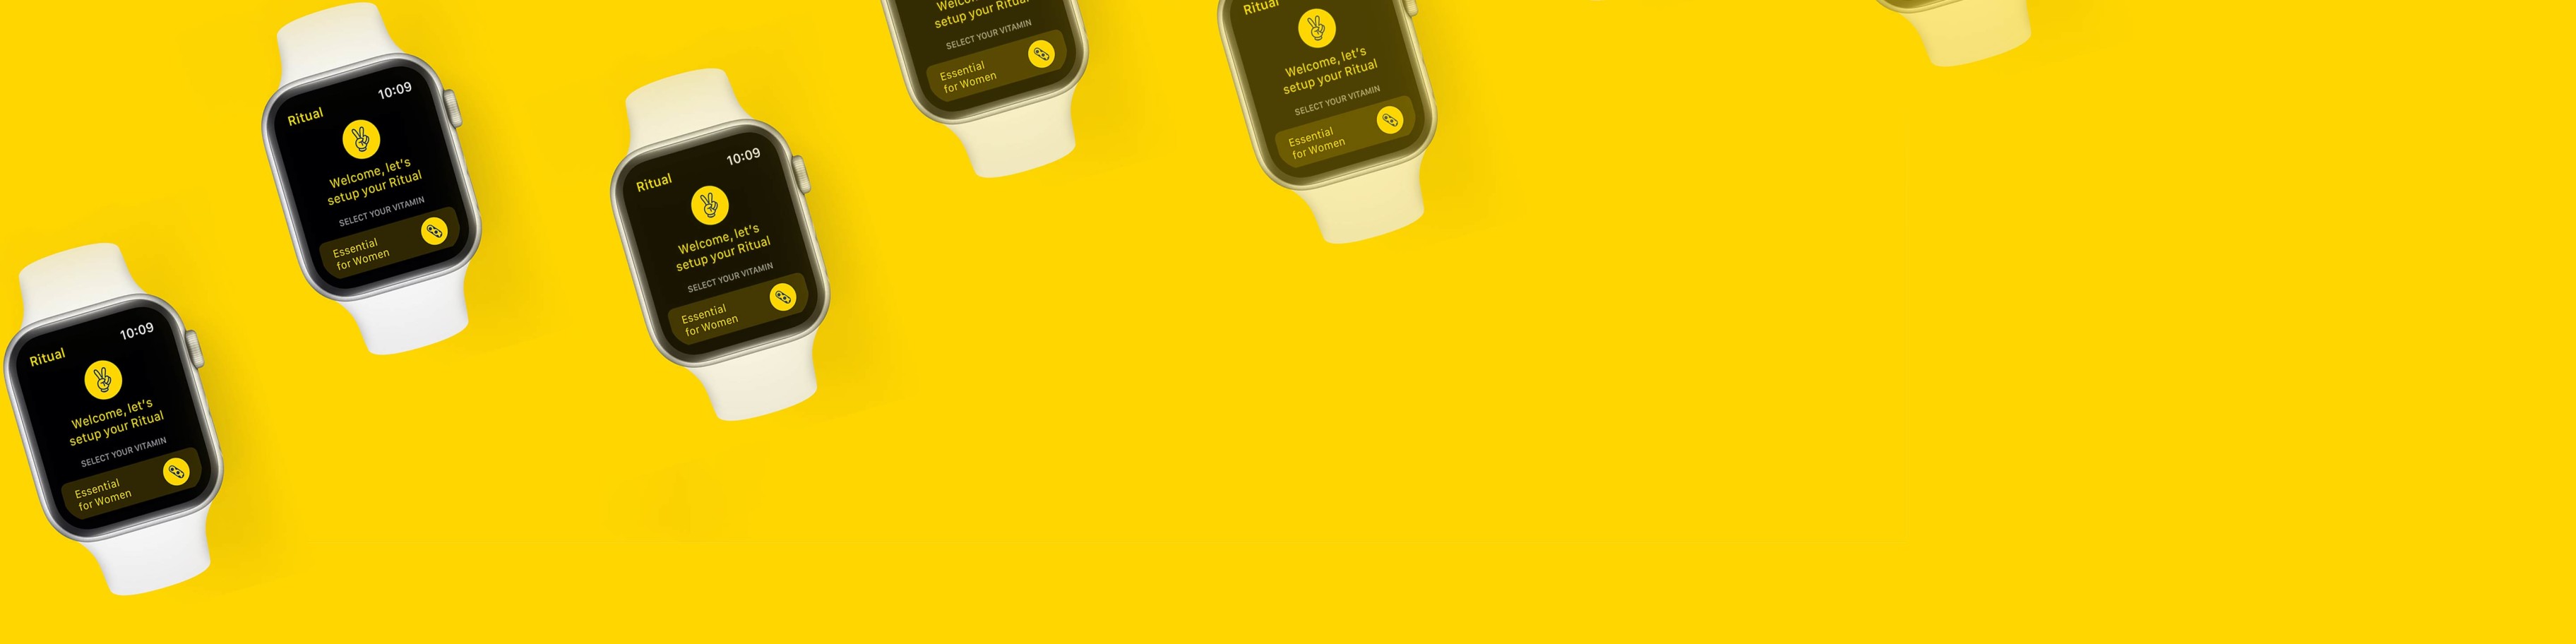 Meet our new app for Apple Watch, which will help you remember to take your vitamins.